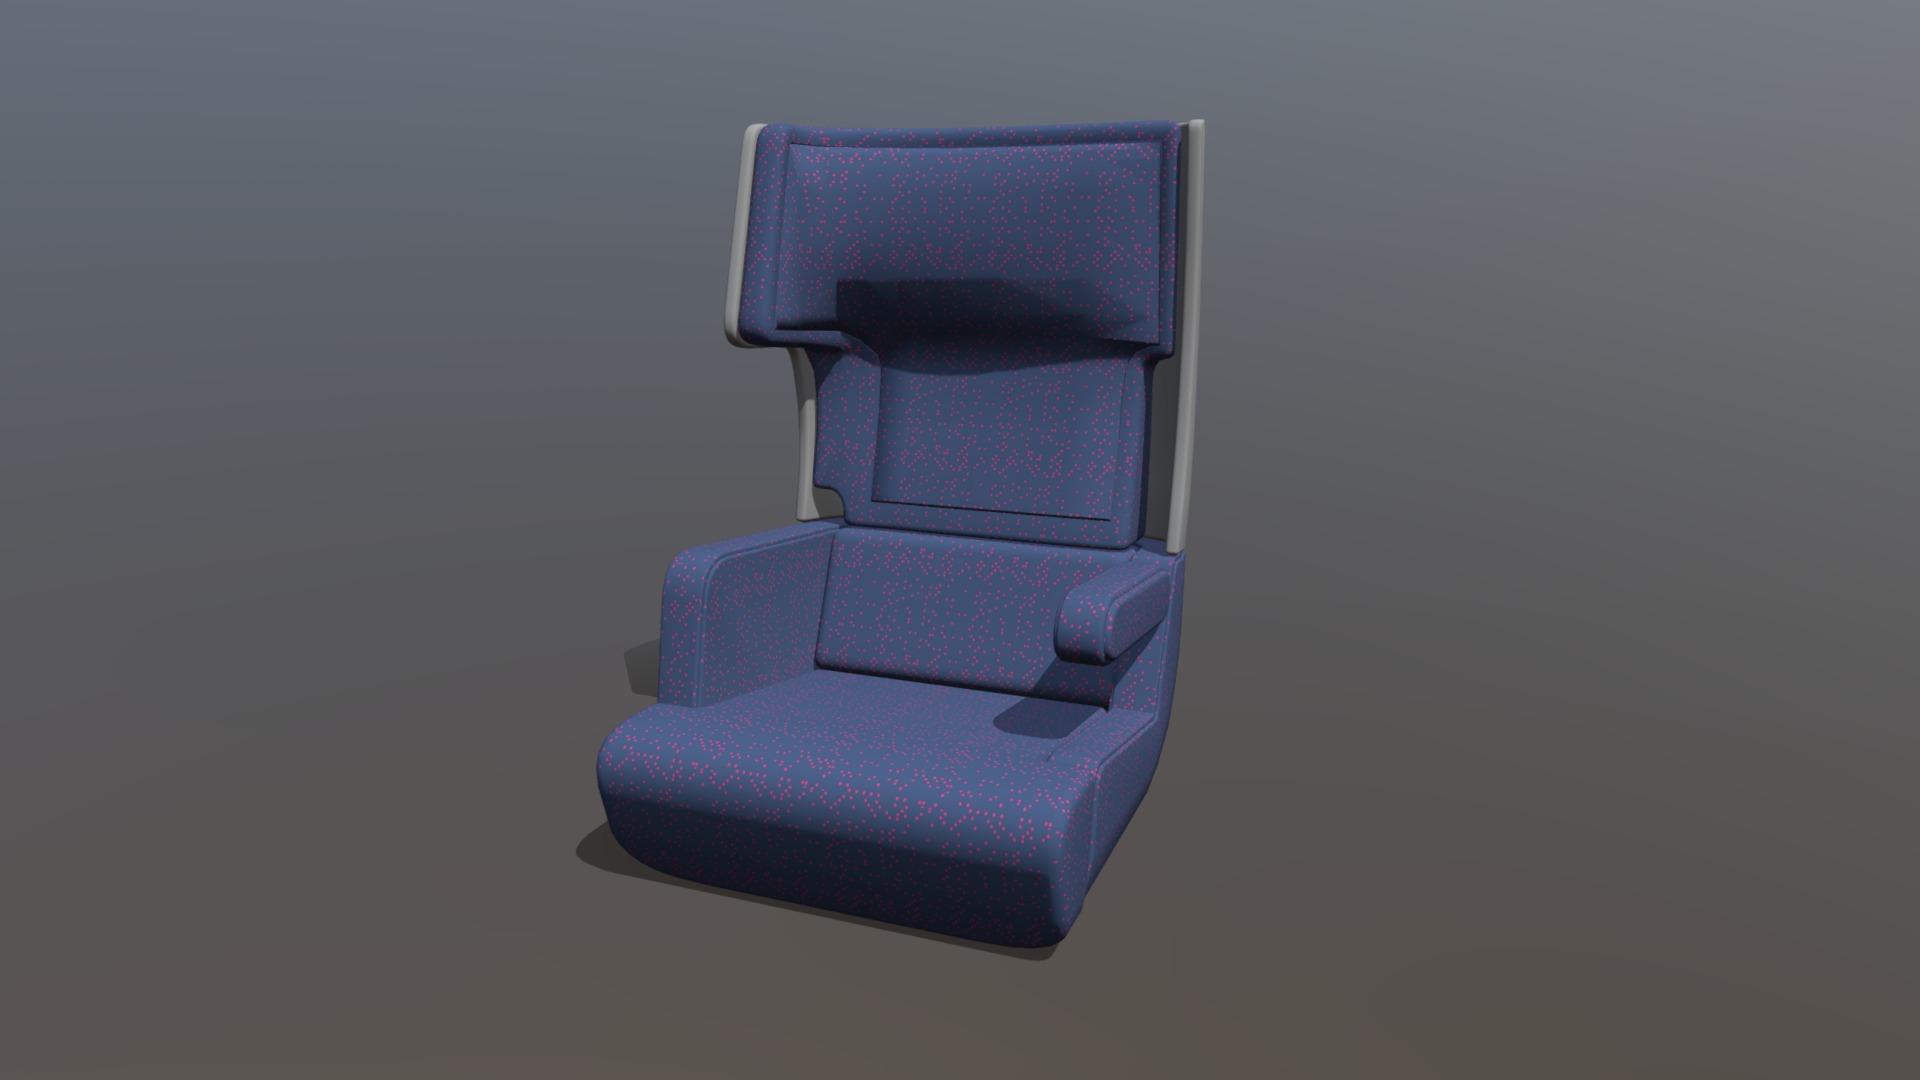 3D model Railway High Speed Railway Seats 011 - This is a 3D model of the Railway High Speed Railway Seats 011. The 3D model is about a purple chair with a blue cushion.